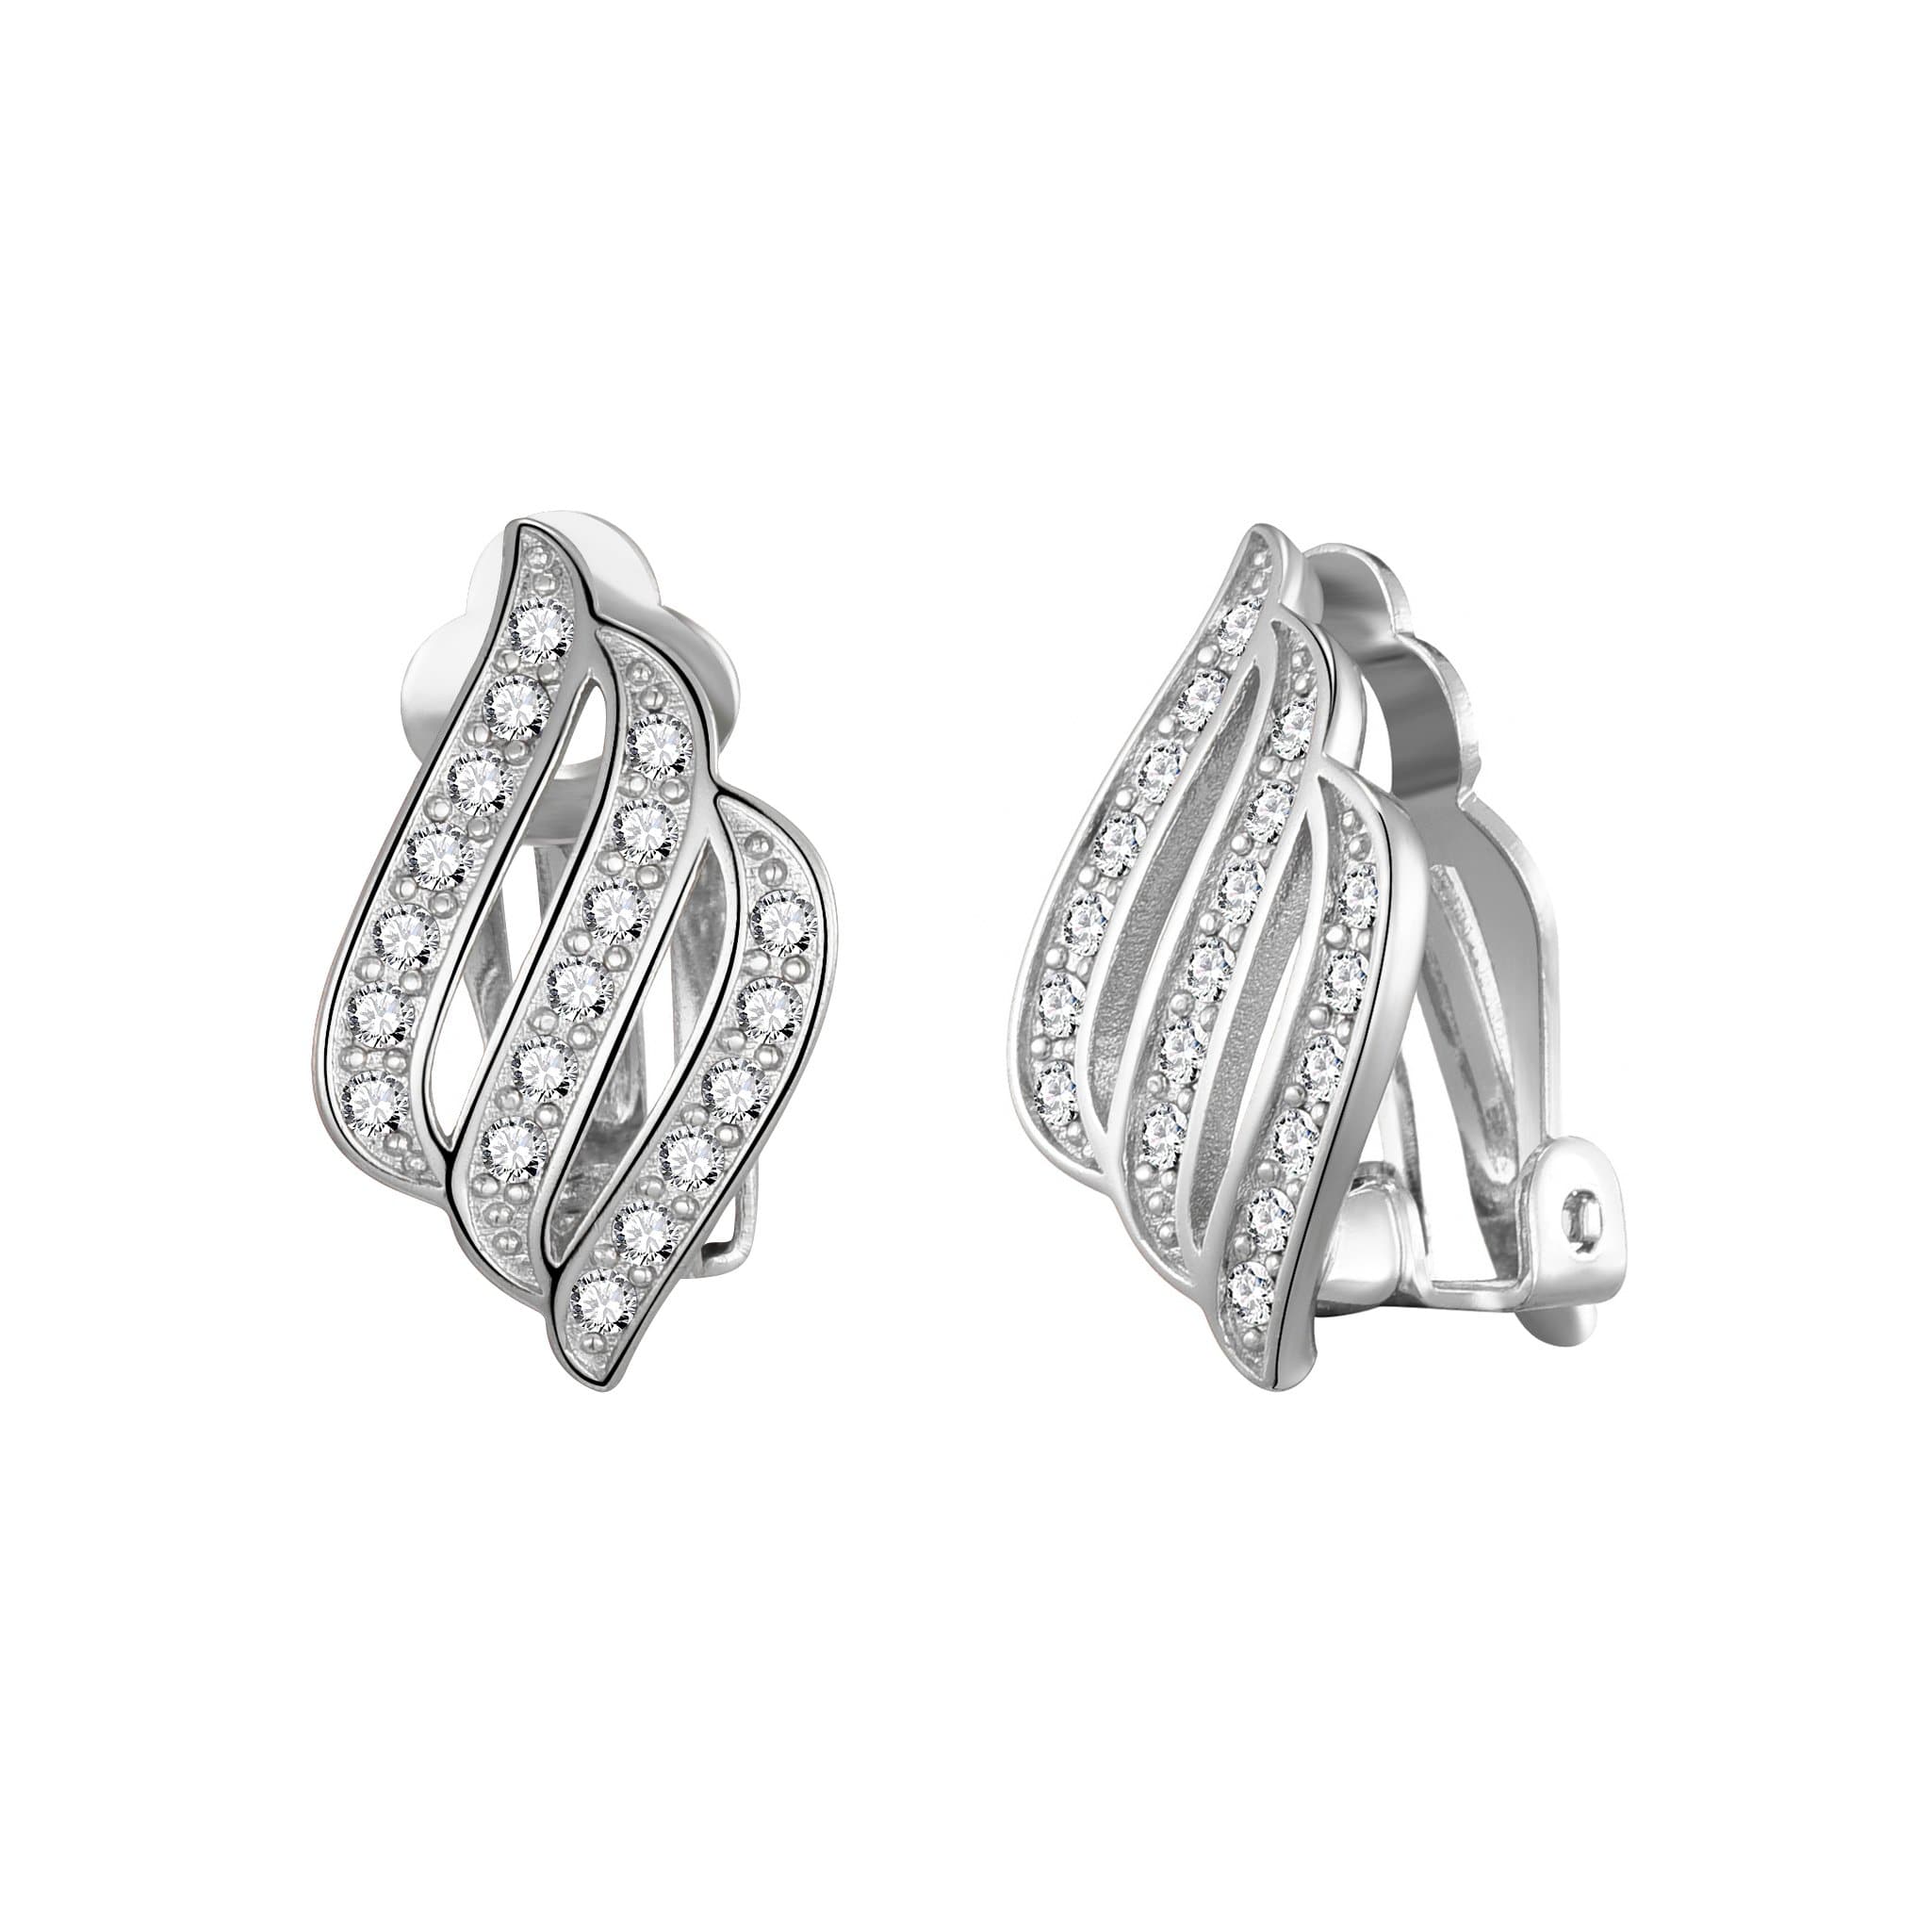 Silver Plated Triple Row Clip On Earrings Created with Zircondia® Crystals by Philip Jones Jewellery